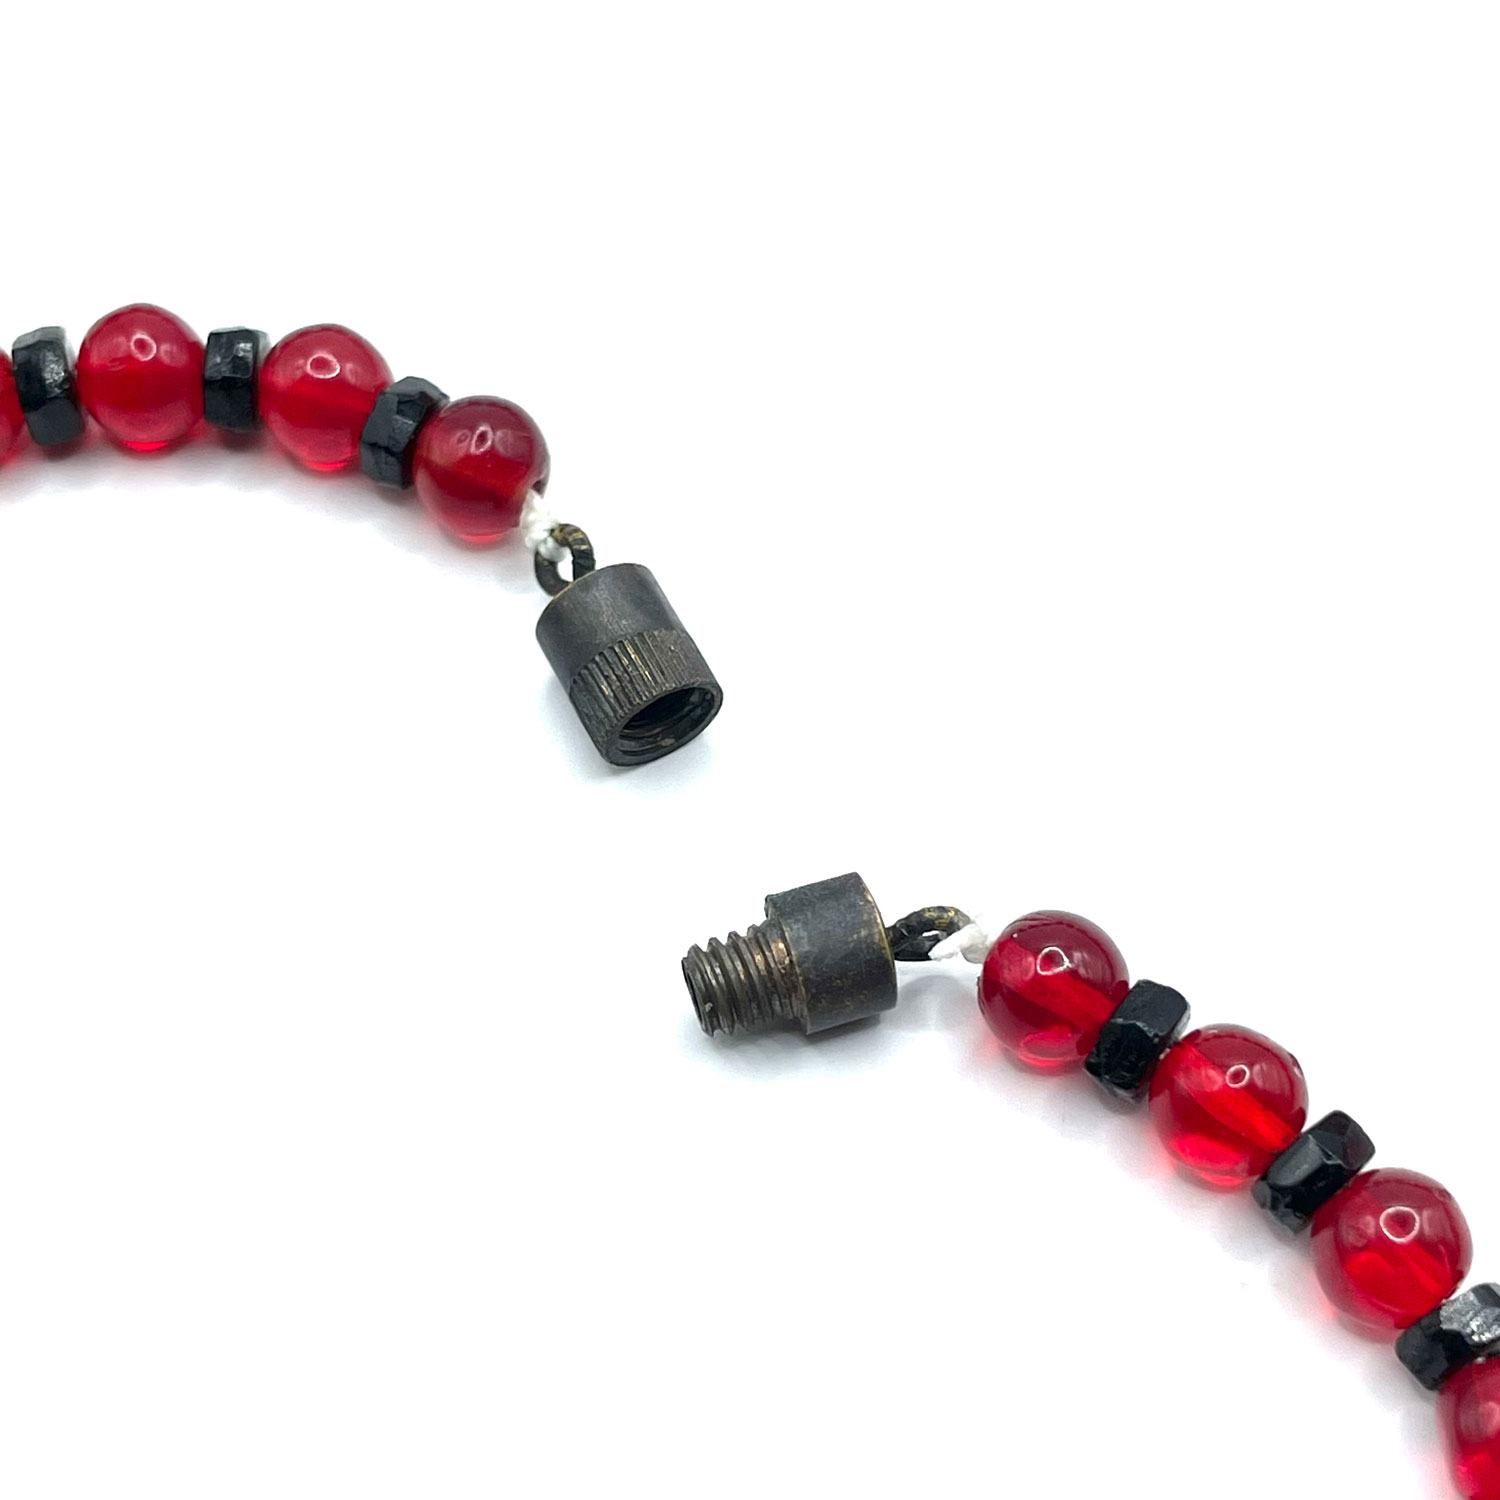 Scarlet red glass bead necklace